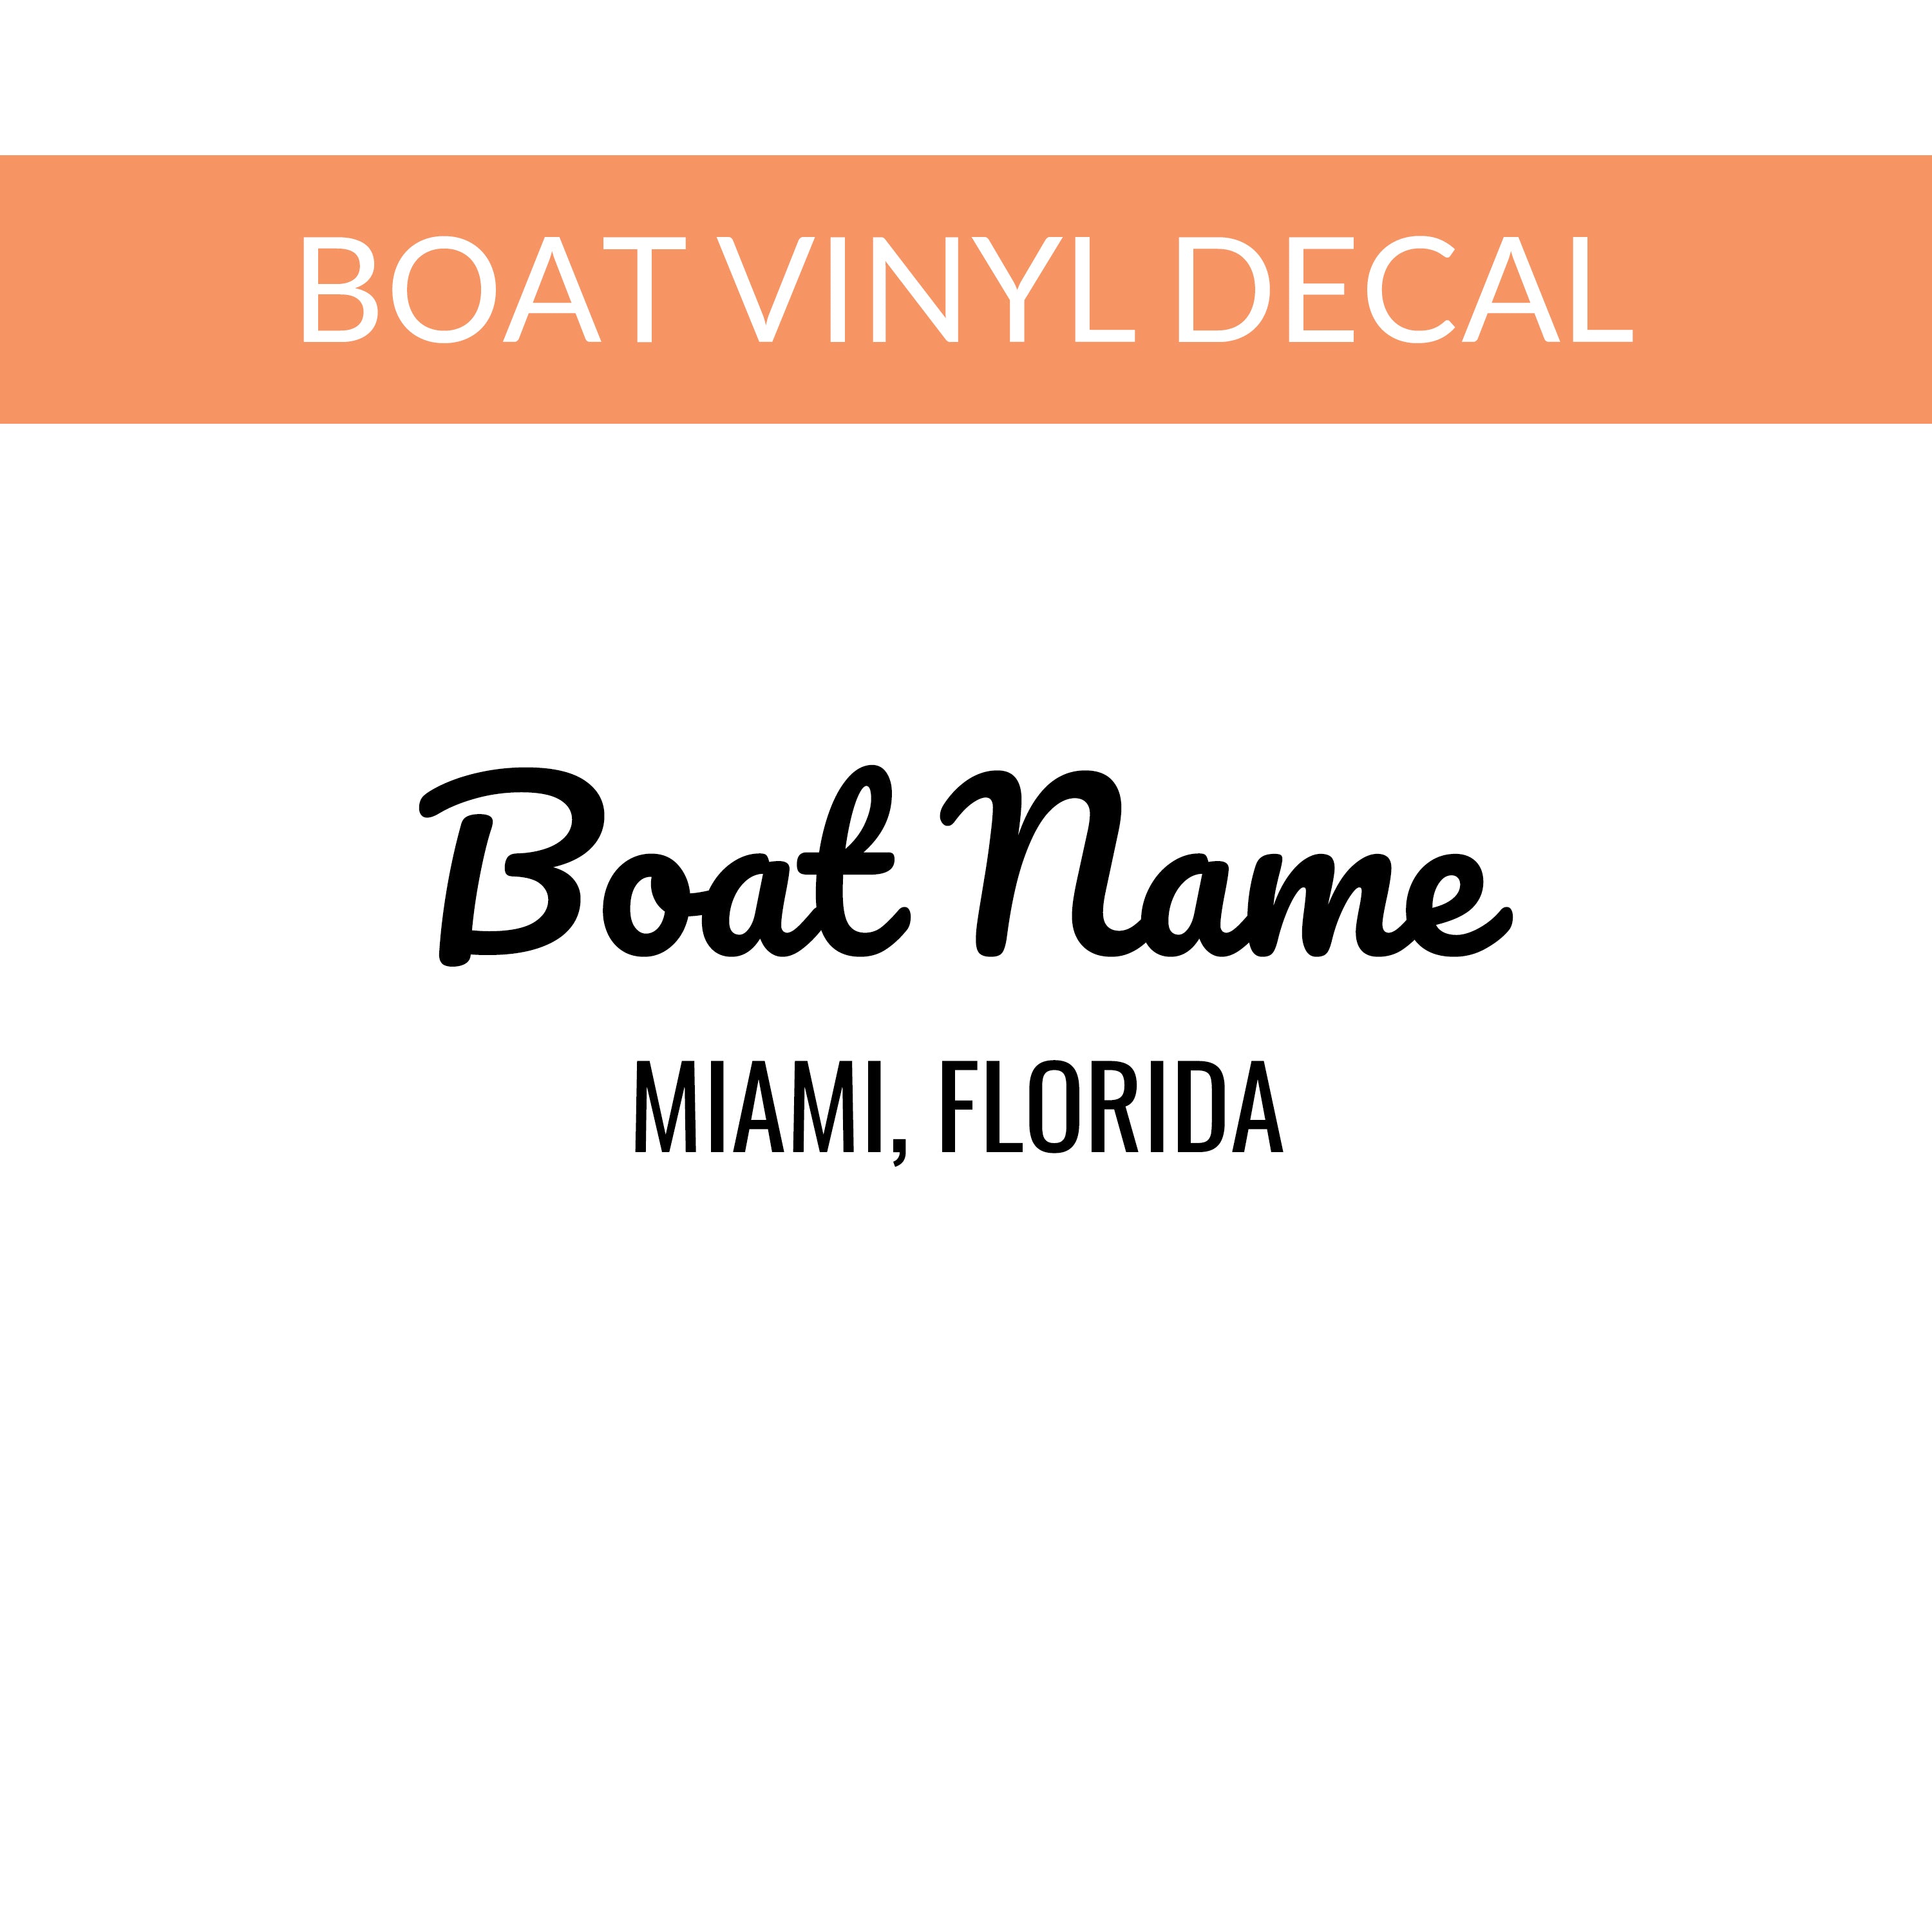 Personalized Boat Name Vinyl Decal with Hailing Port State - Permanent Marine-Grade for Signs, Speed boat, Fishing Vessel, Watercraft C12, B1